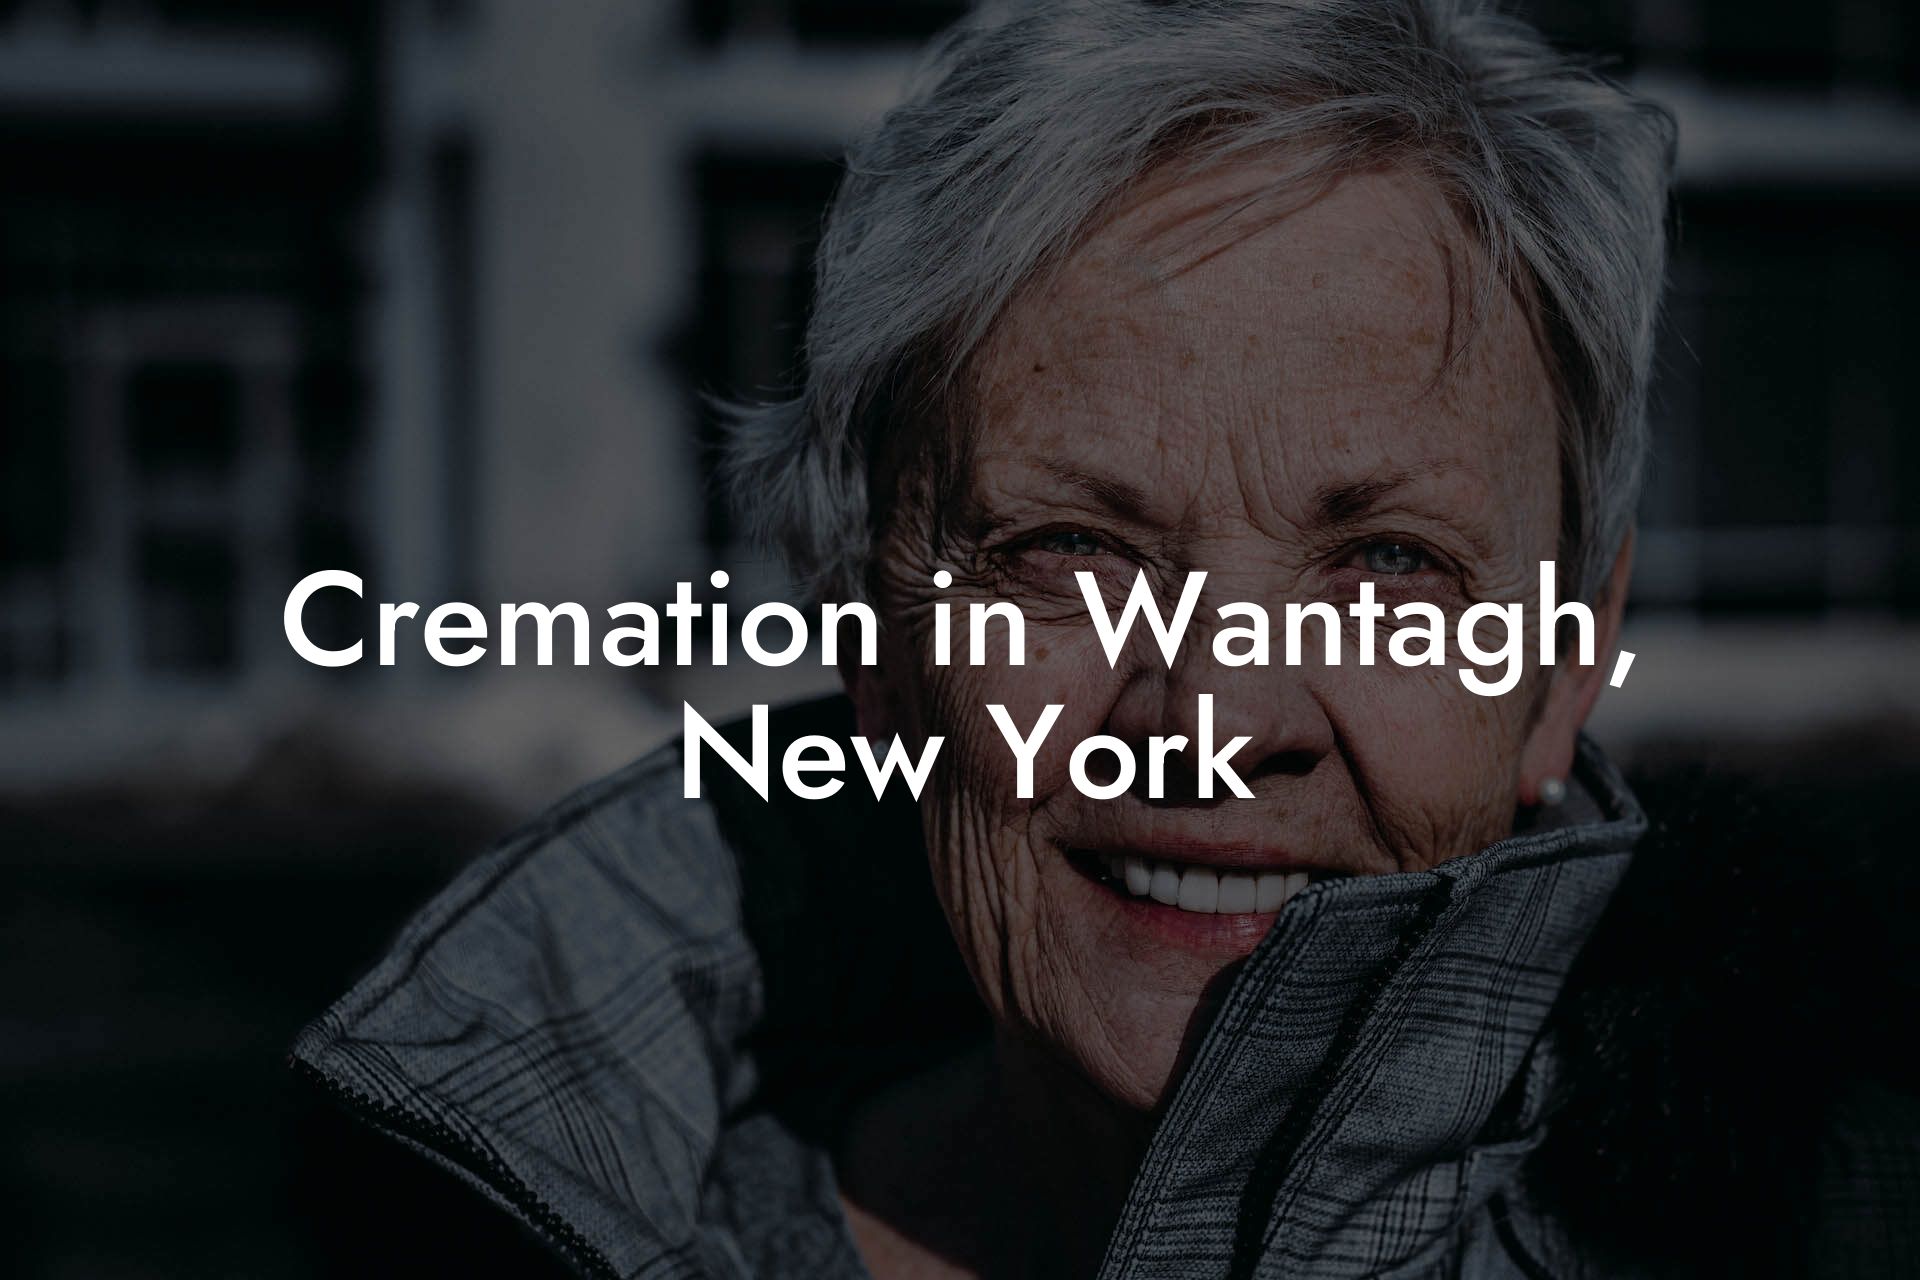 Cremation in Wantagh, New York